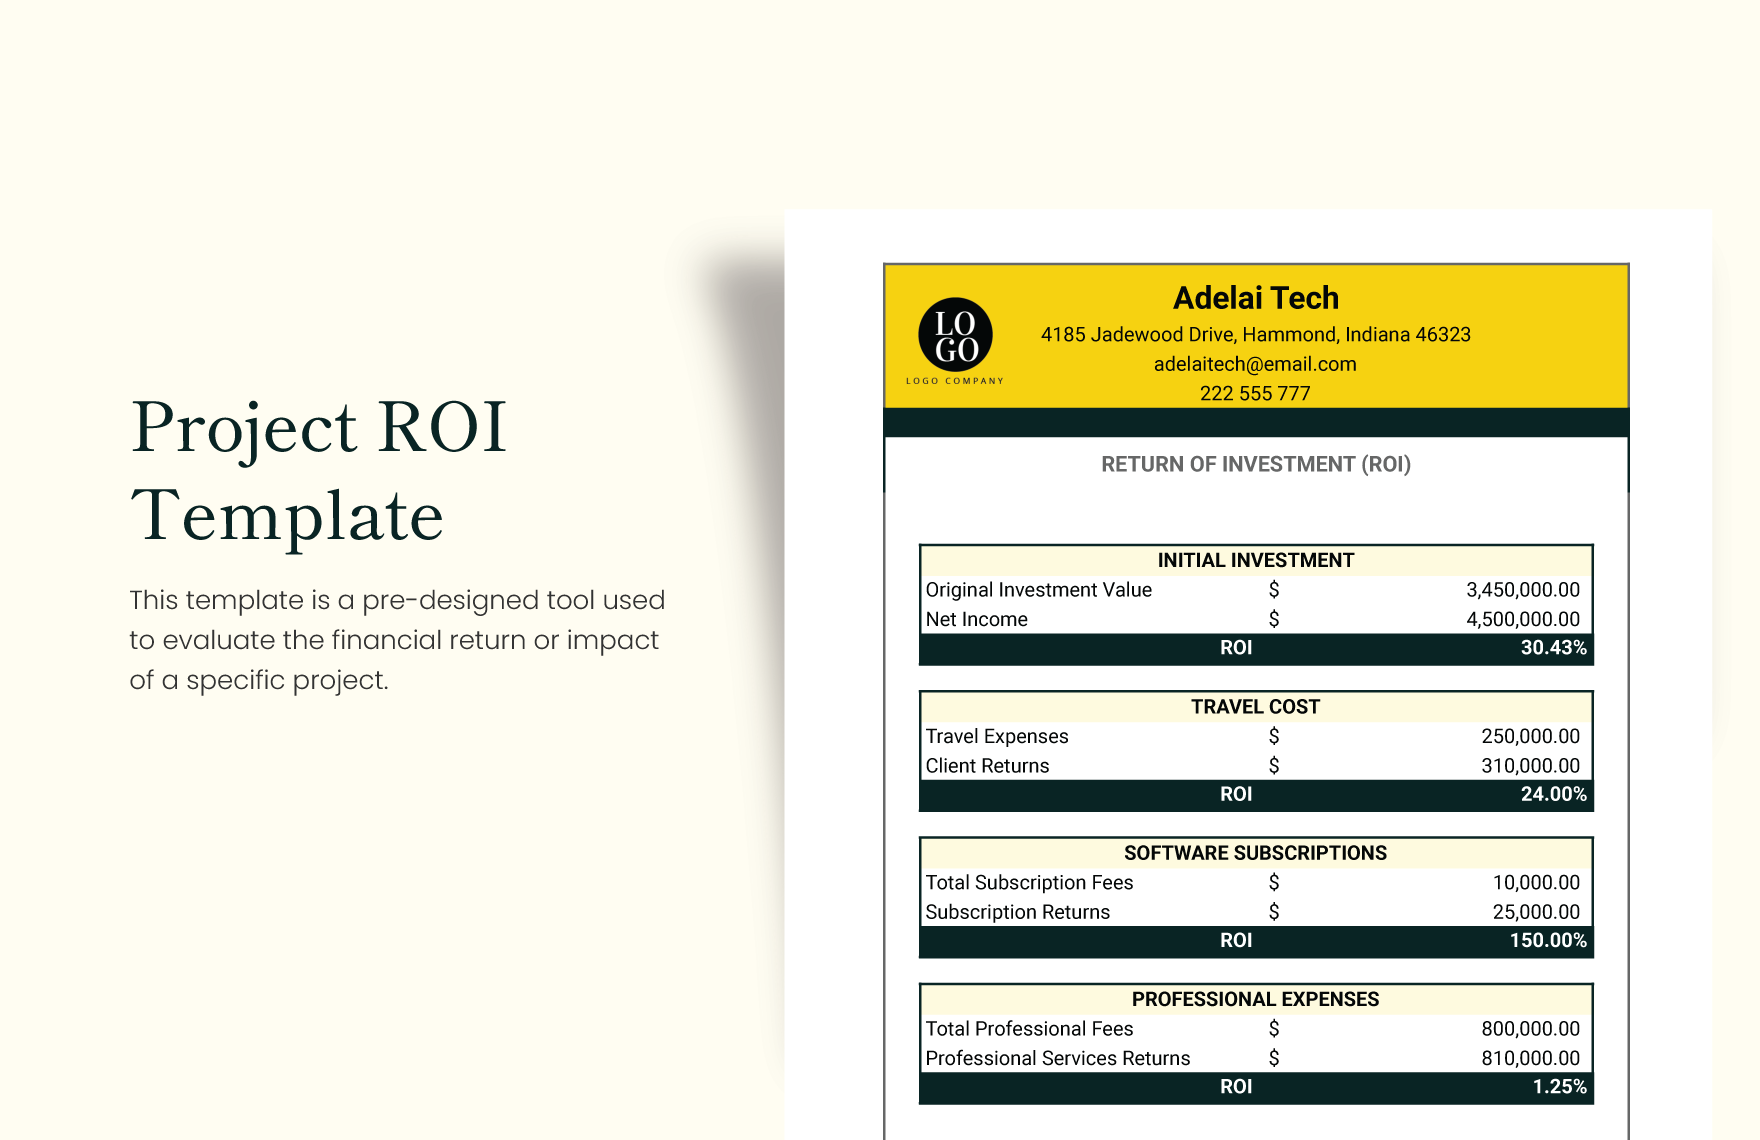 Project ROI Template